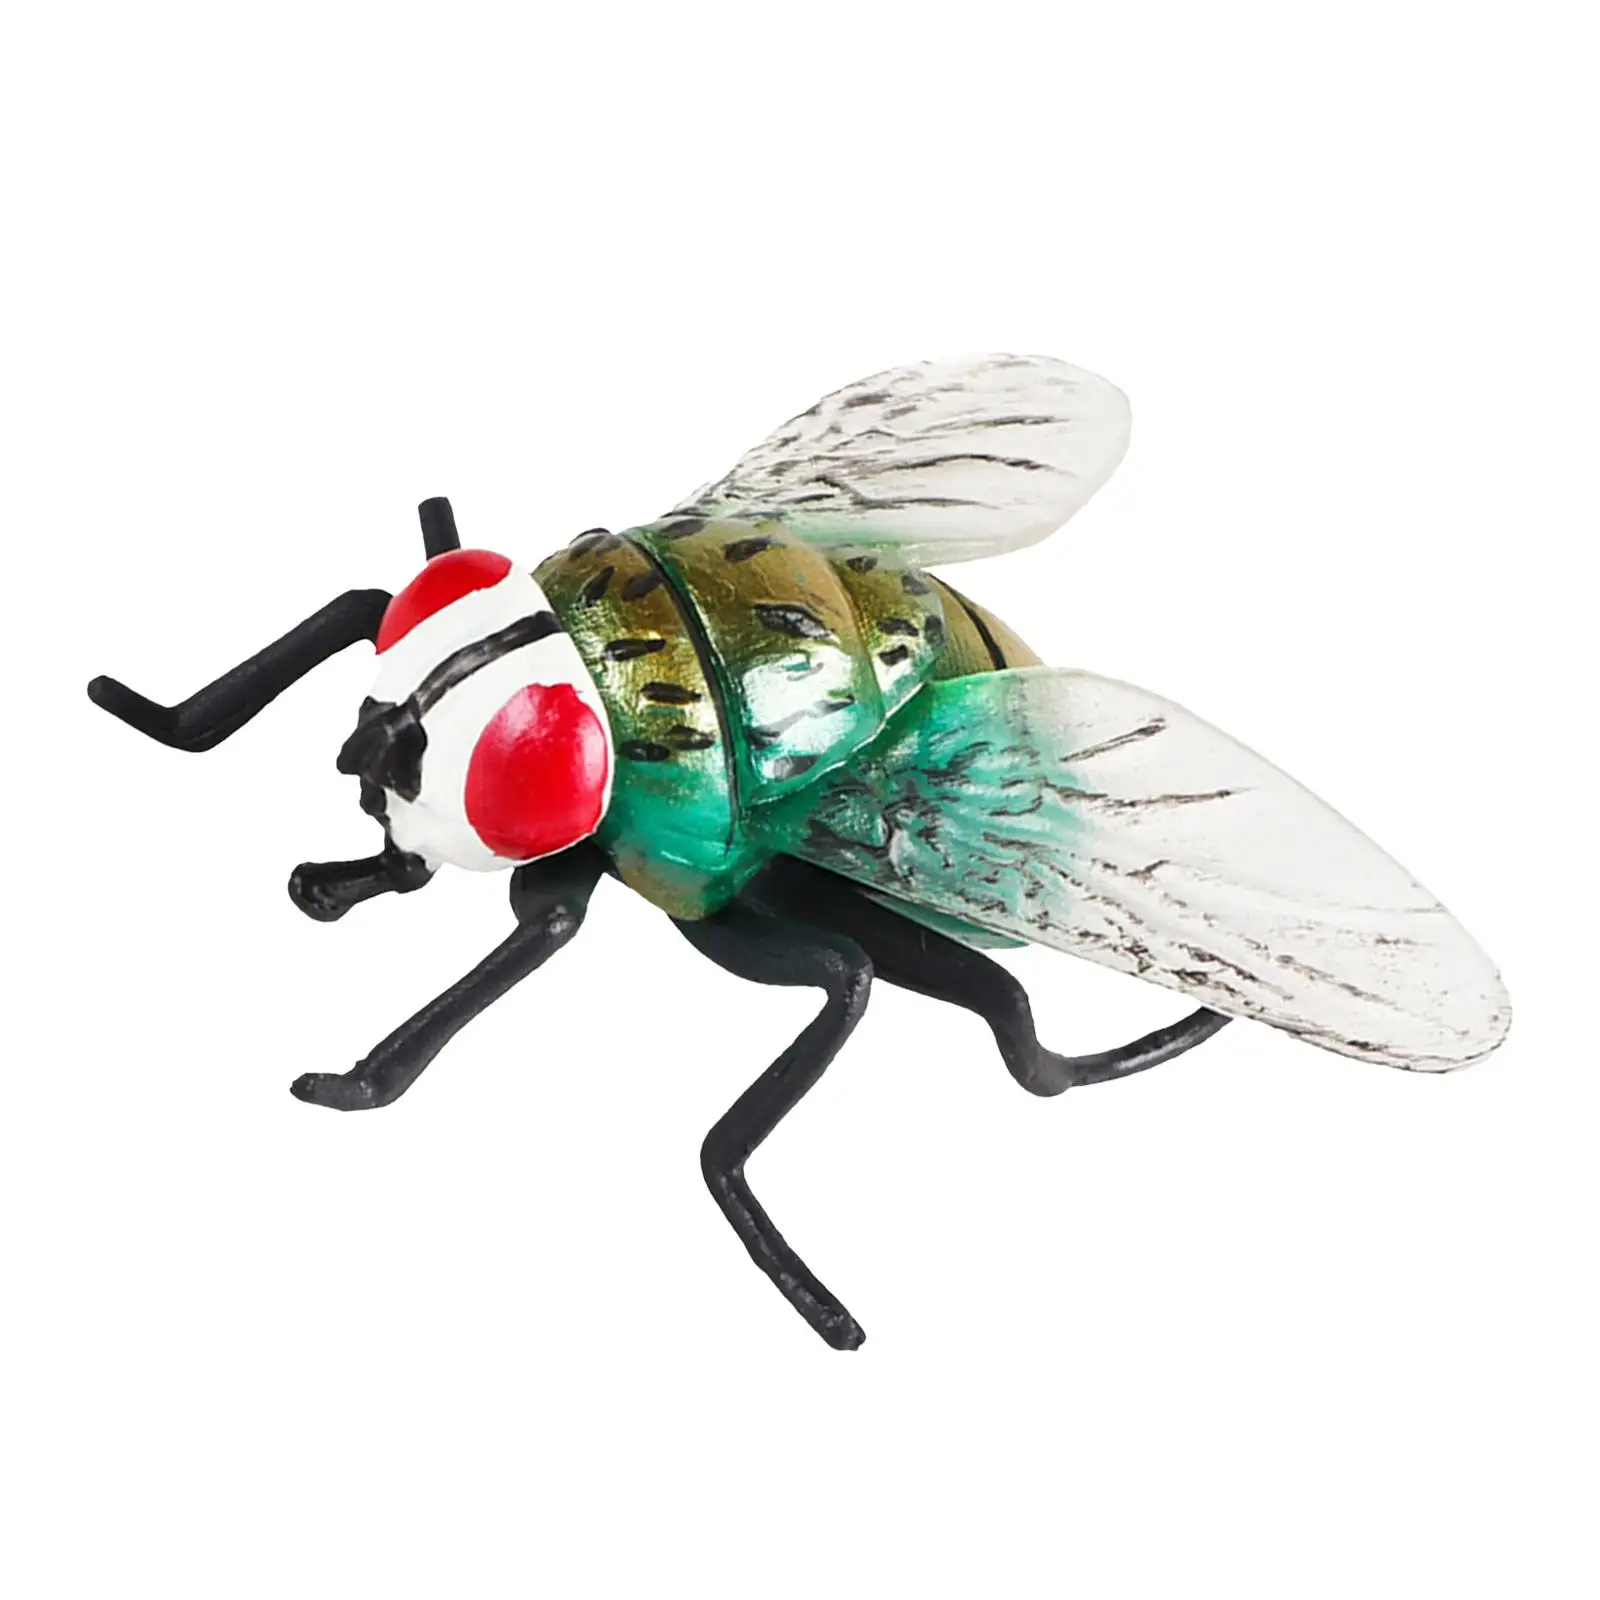 Realistic Fly Toys Cognition Educational Toy Flies Figures Photography Props Party Supplies Collection for Children Kids Girls